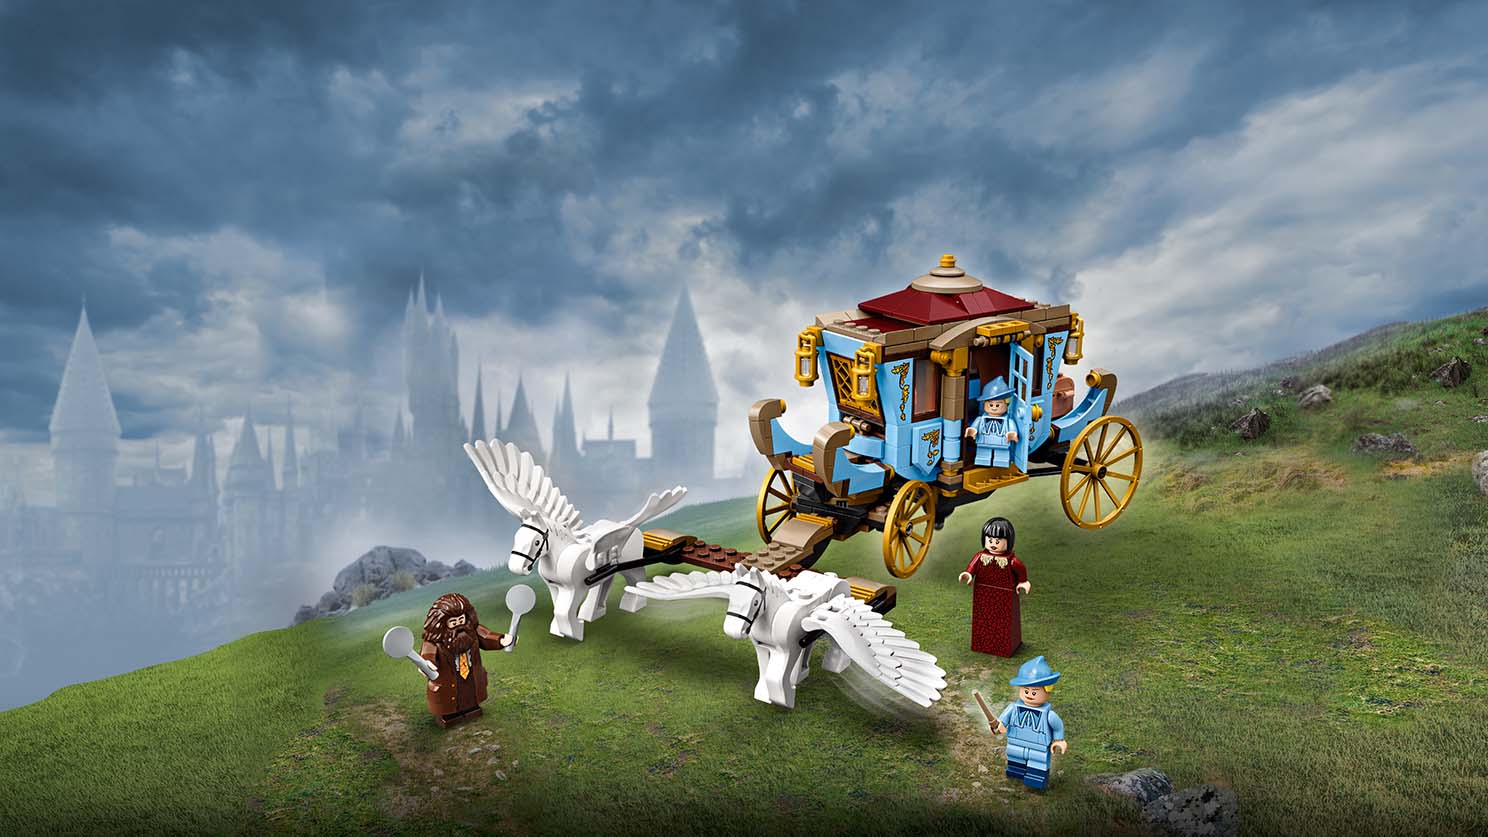 Beauxbatons' Carriage: Arrival at Hogwar 75958 - Harry and Beasts™ Sets - LEGO.com for kids